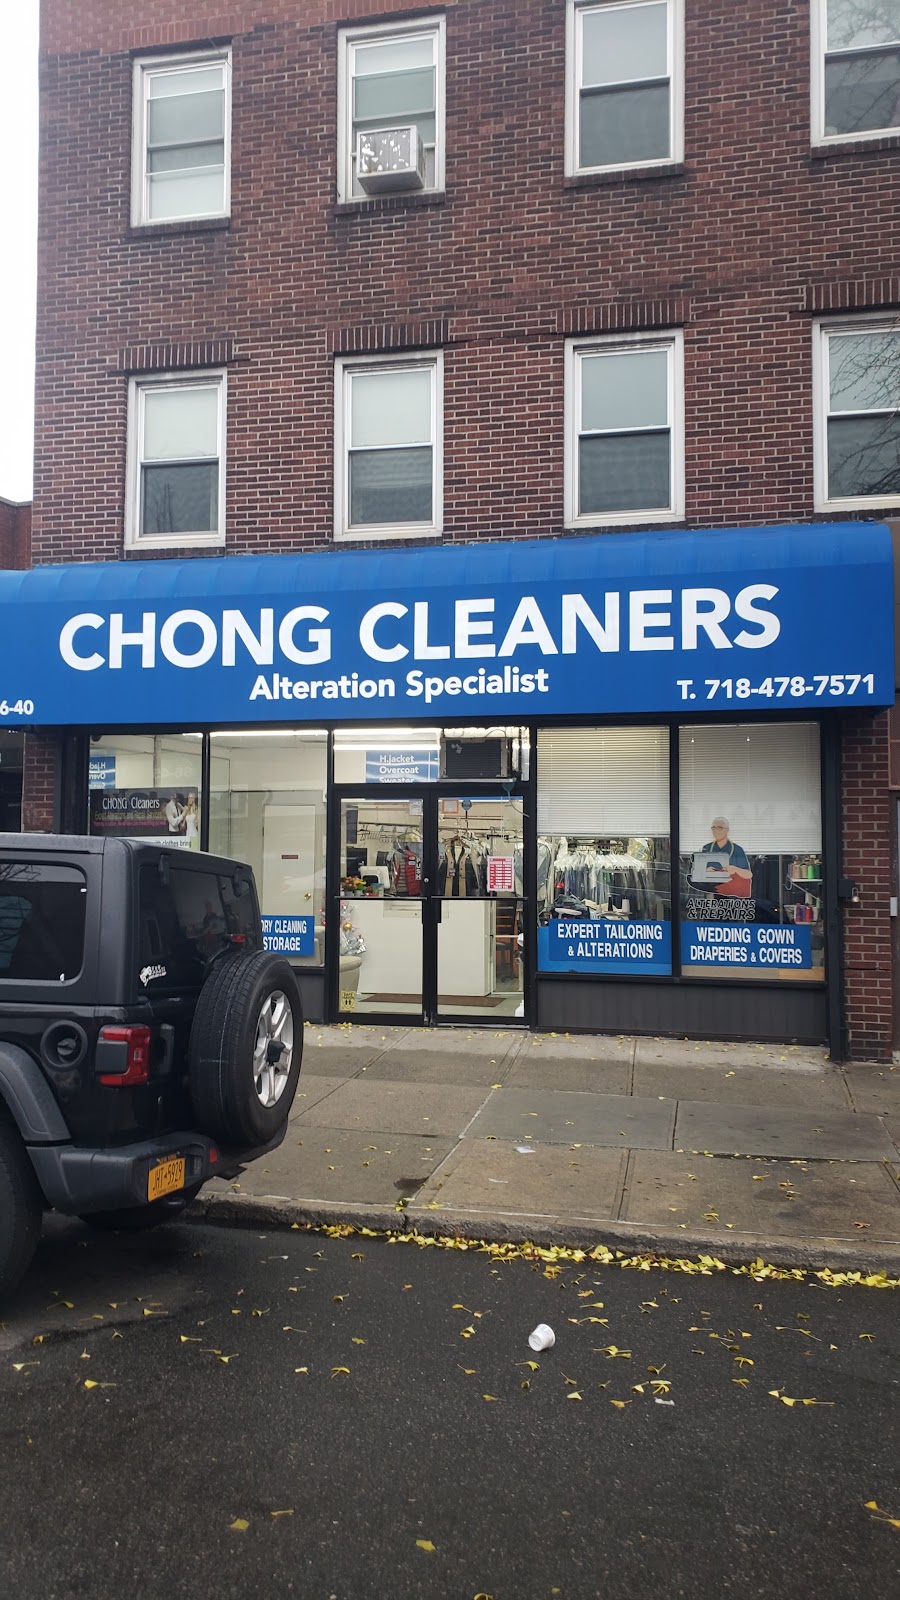 Chong Cleaners | 66-40 Grand Ave, Queens, NY 11378 | Phone: (718) 478-7571